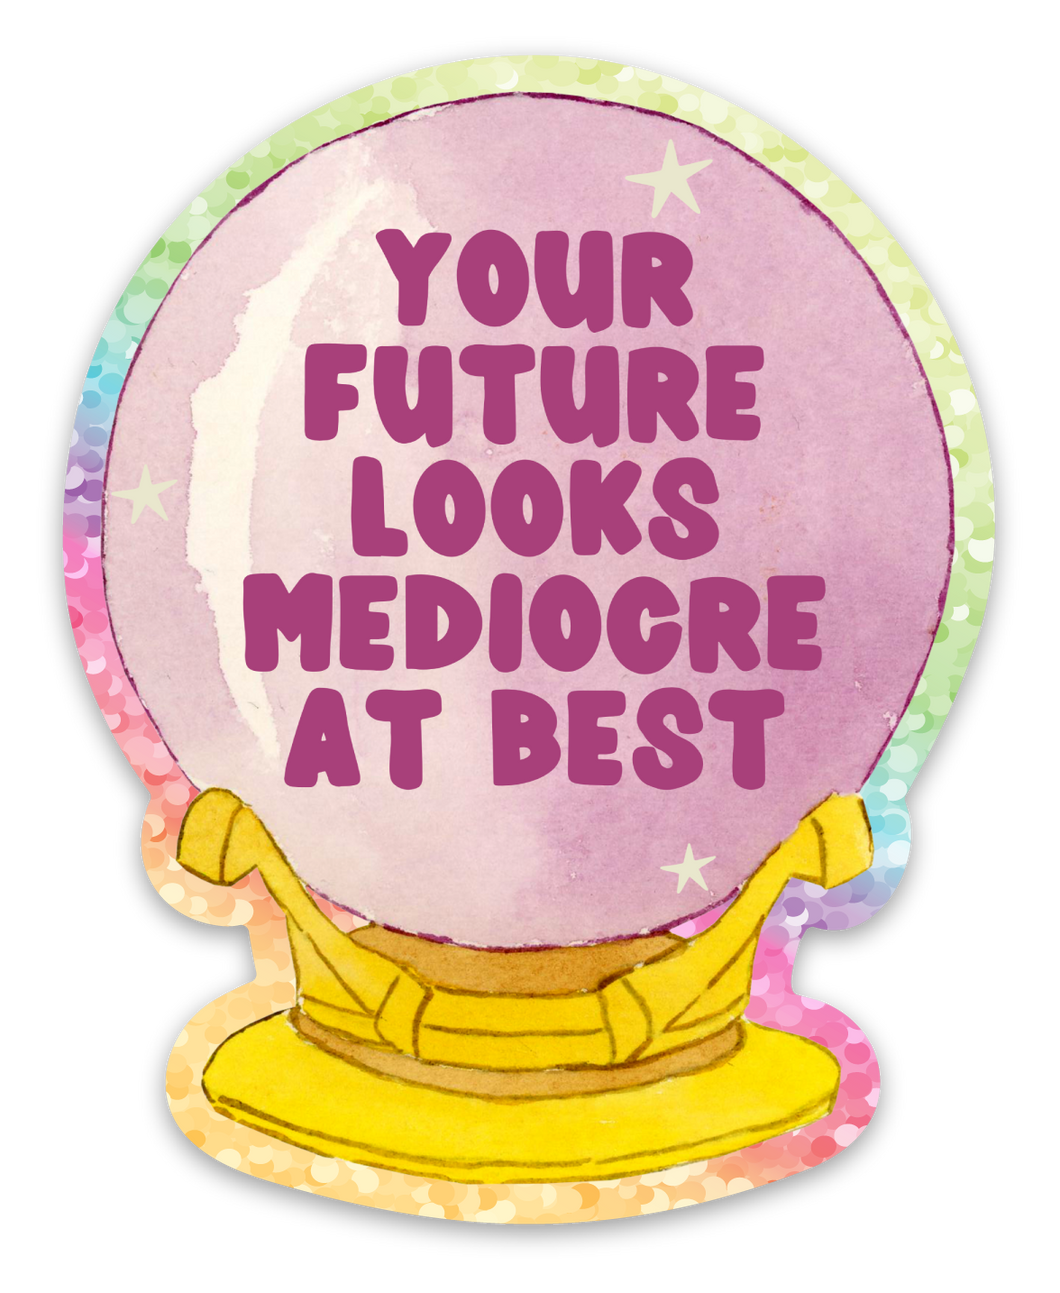 Fortune Teller Crystal Ball Sticker - Funny Sassy Stickers